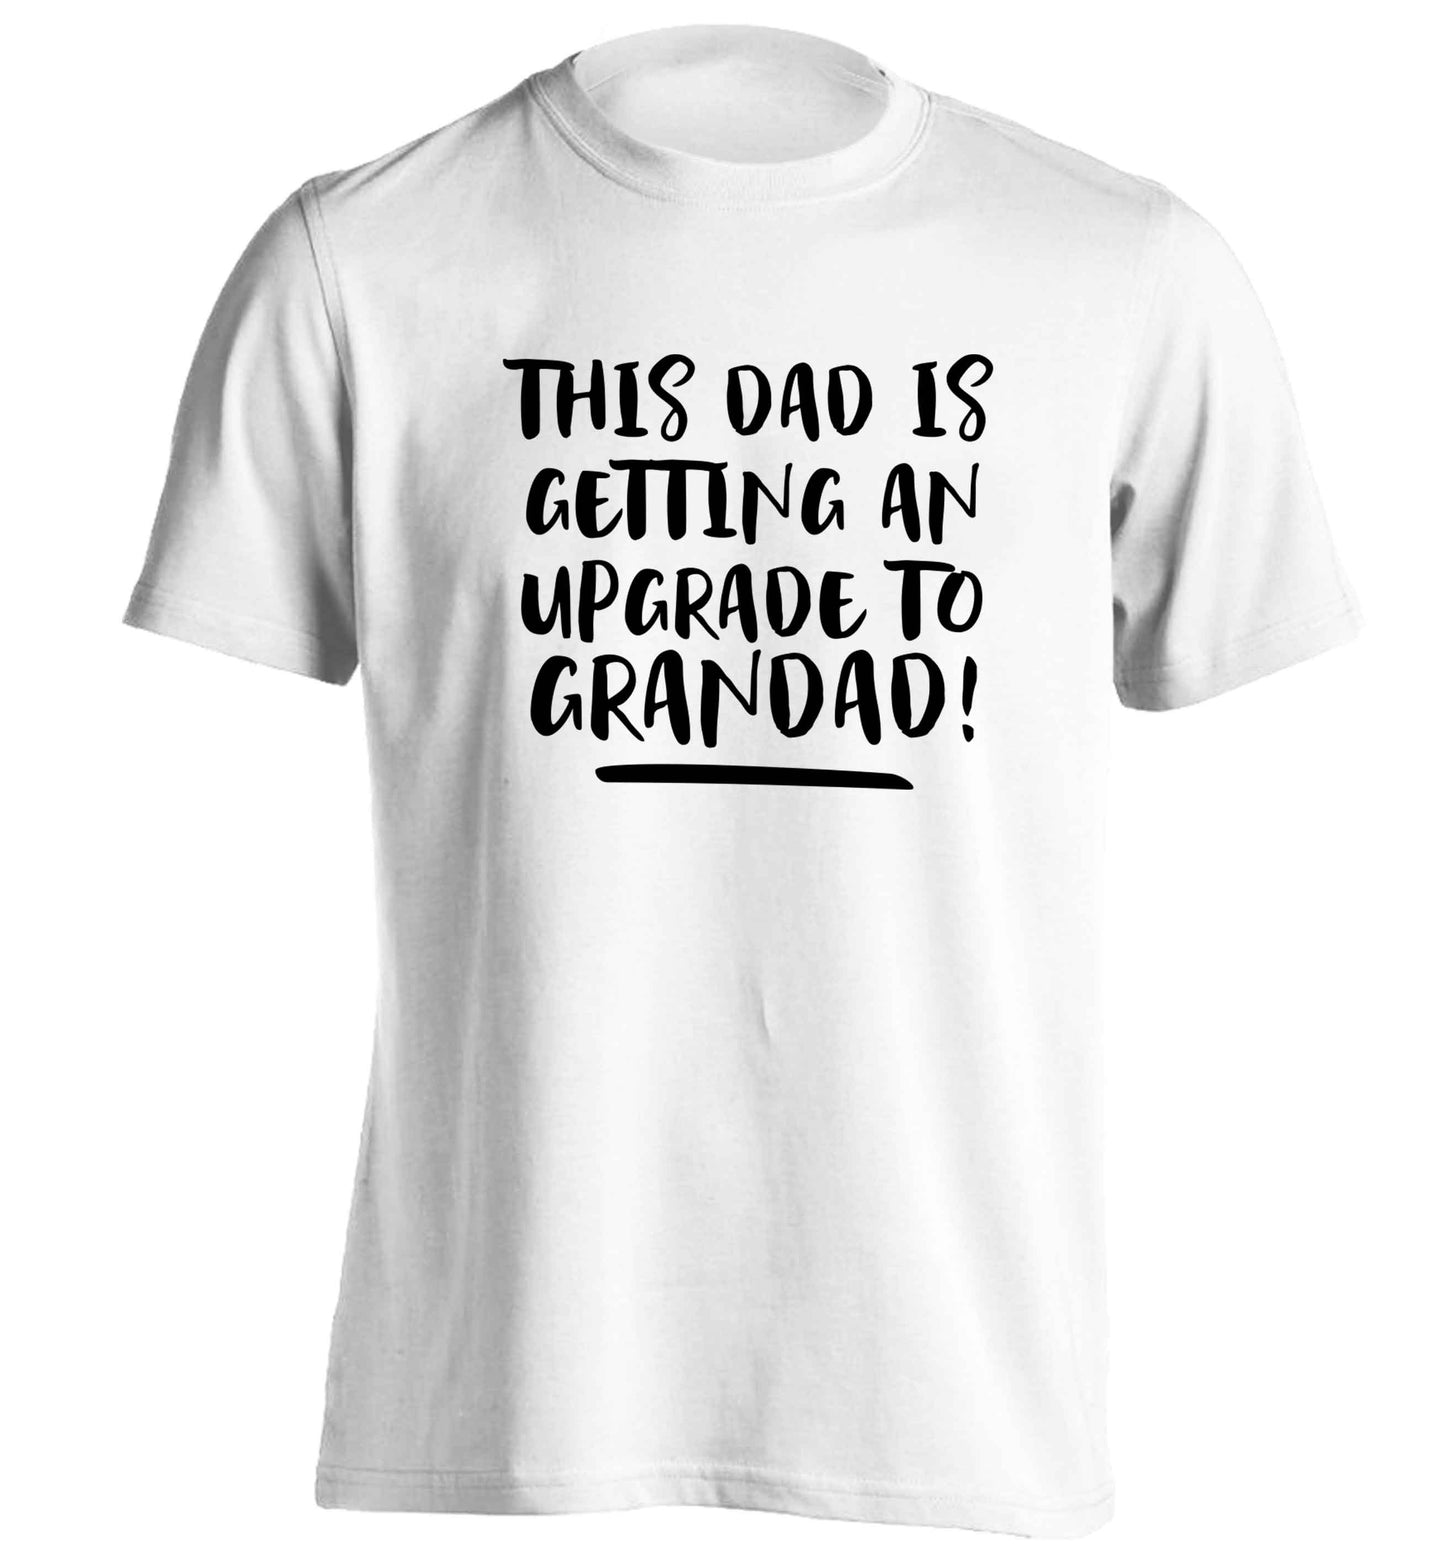 This dad is getting an upgrade to grandad! adults unisex white Tshirt 2XL